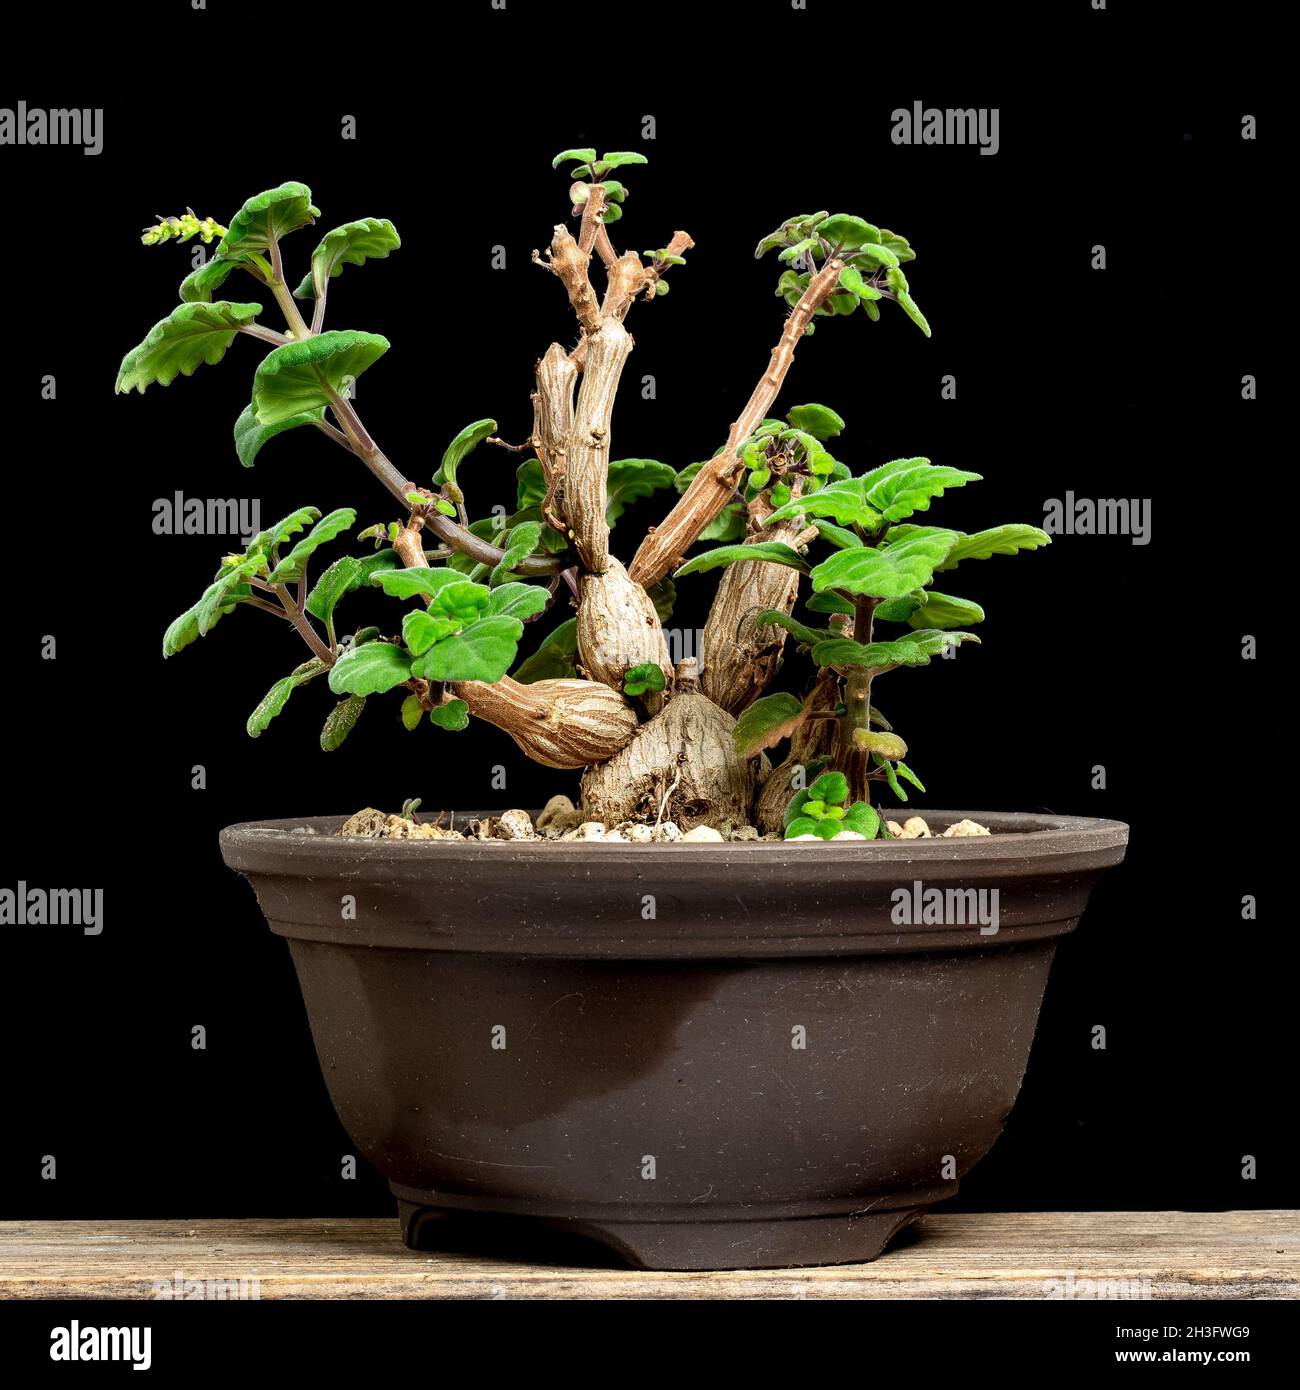 Bonsai Mint, Plectranthus ernstii, a succulent evergreen with swollen stems from South Africa, growing in a bonsai pot.  Family Lamiaceae Stock Photo